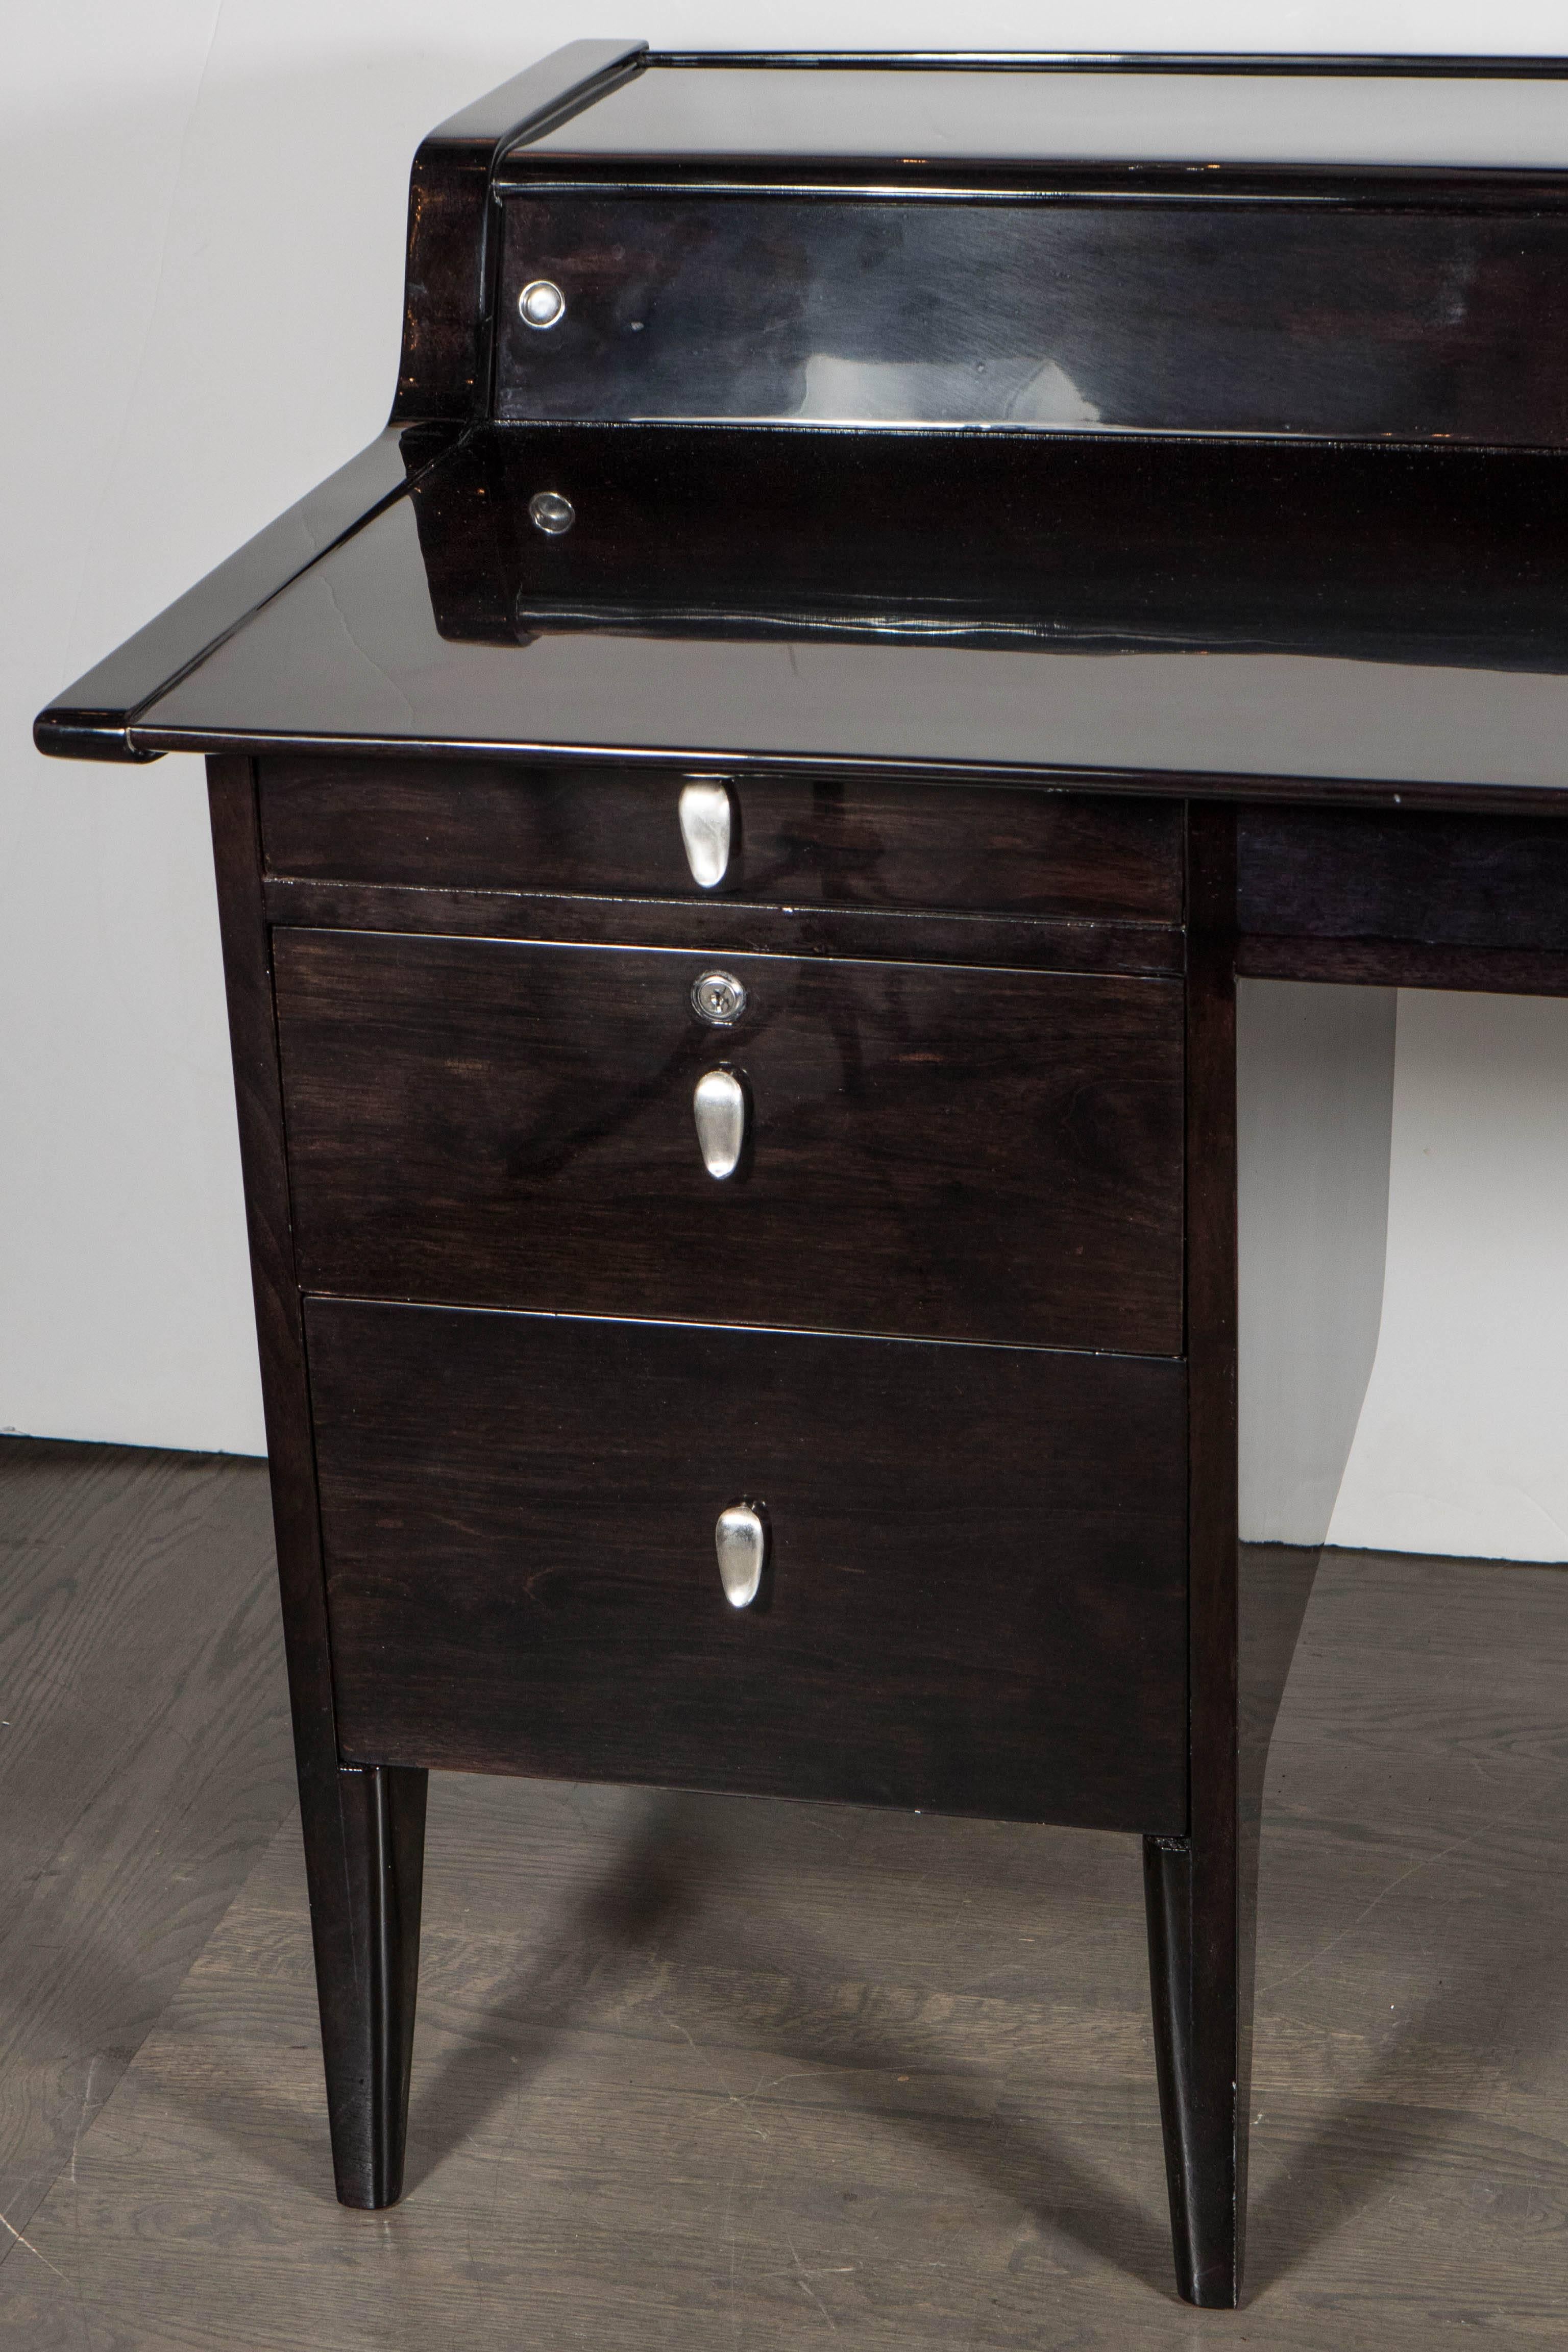 This Mid-Century Modern desk was designed by John Van Koert for the Drexel Company. The desk is ebonized birch with a generous writing surface and also features secretary compartments behind sliding panels. This piece also features original nickel